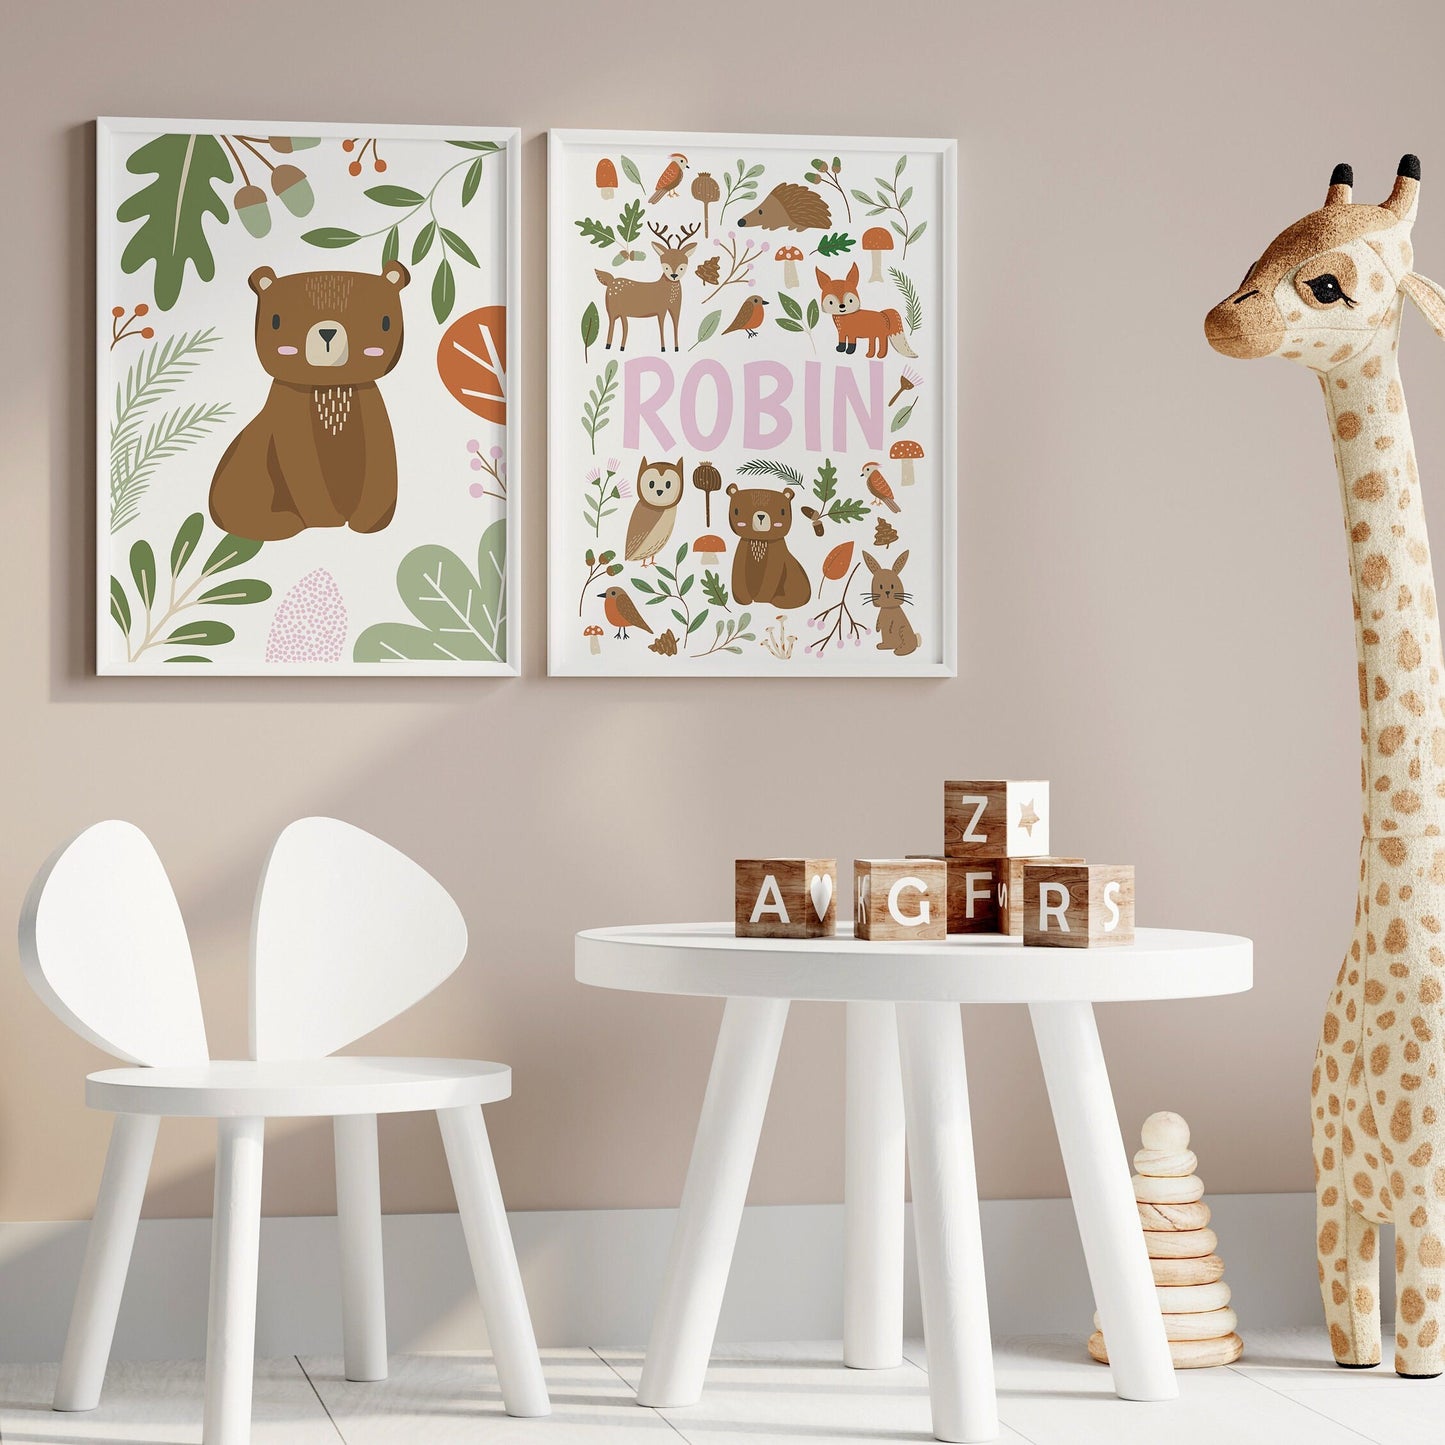 Woodland animal nursery print set for baby girl, personalised name art for toddler bedroom with bear and deer